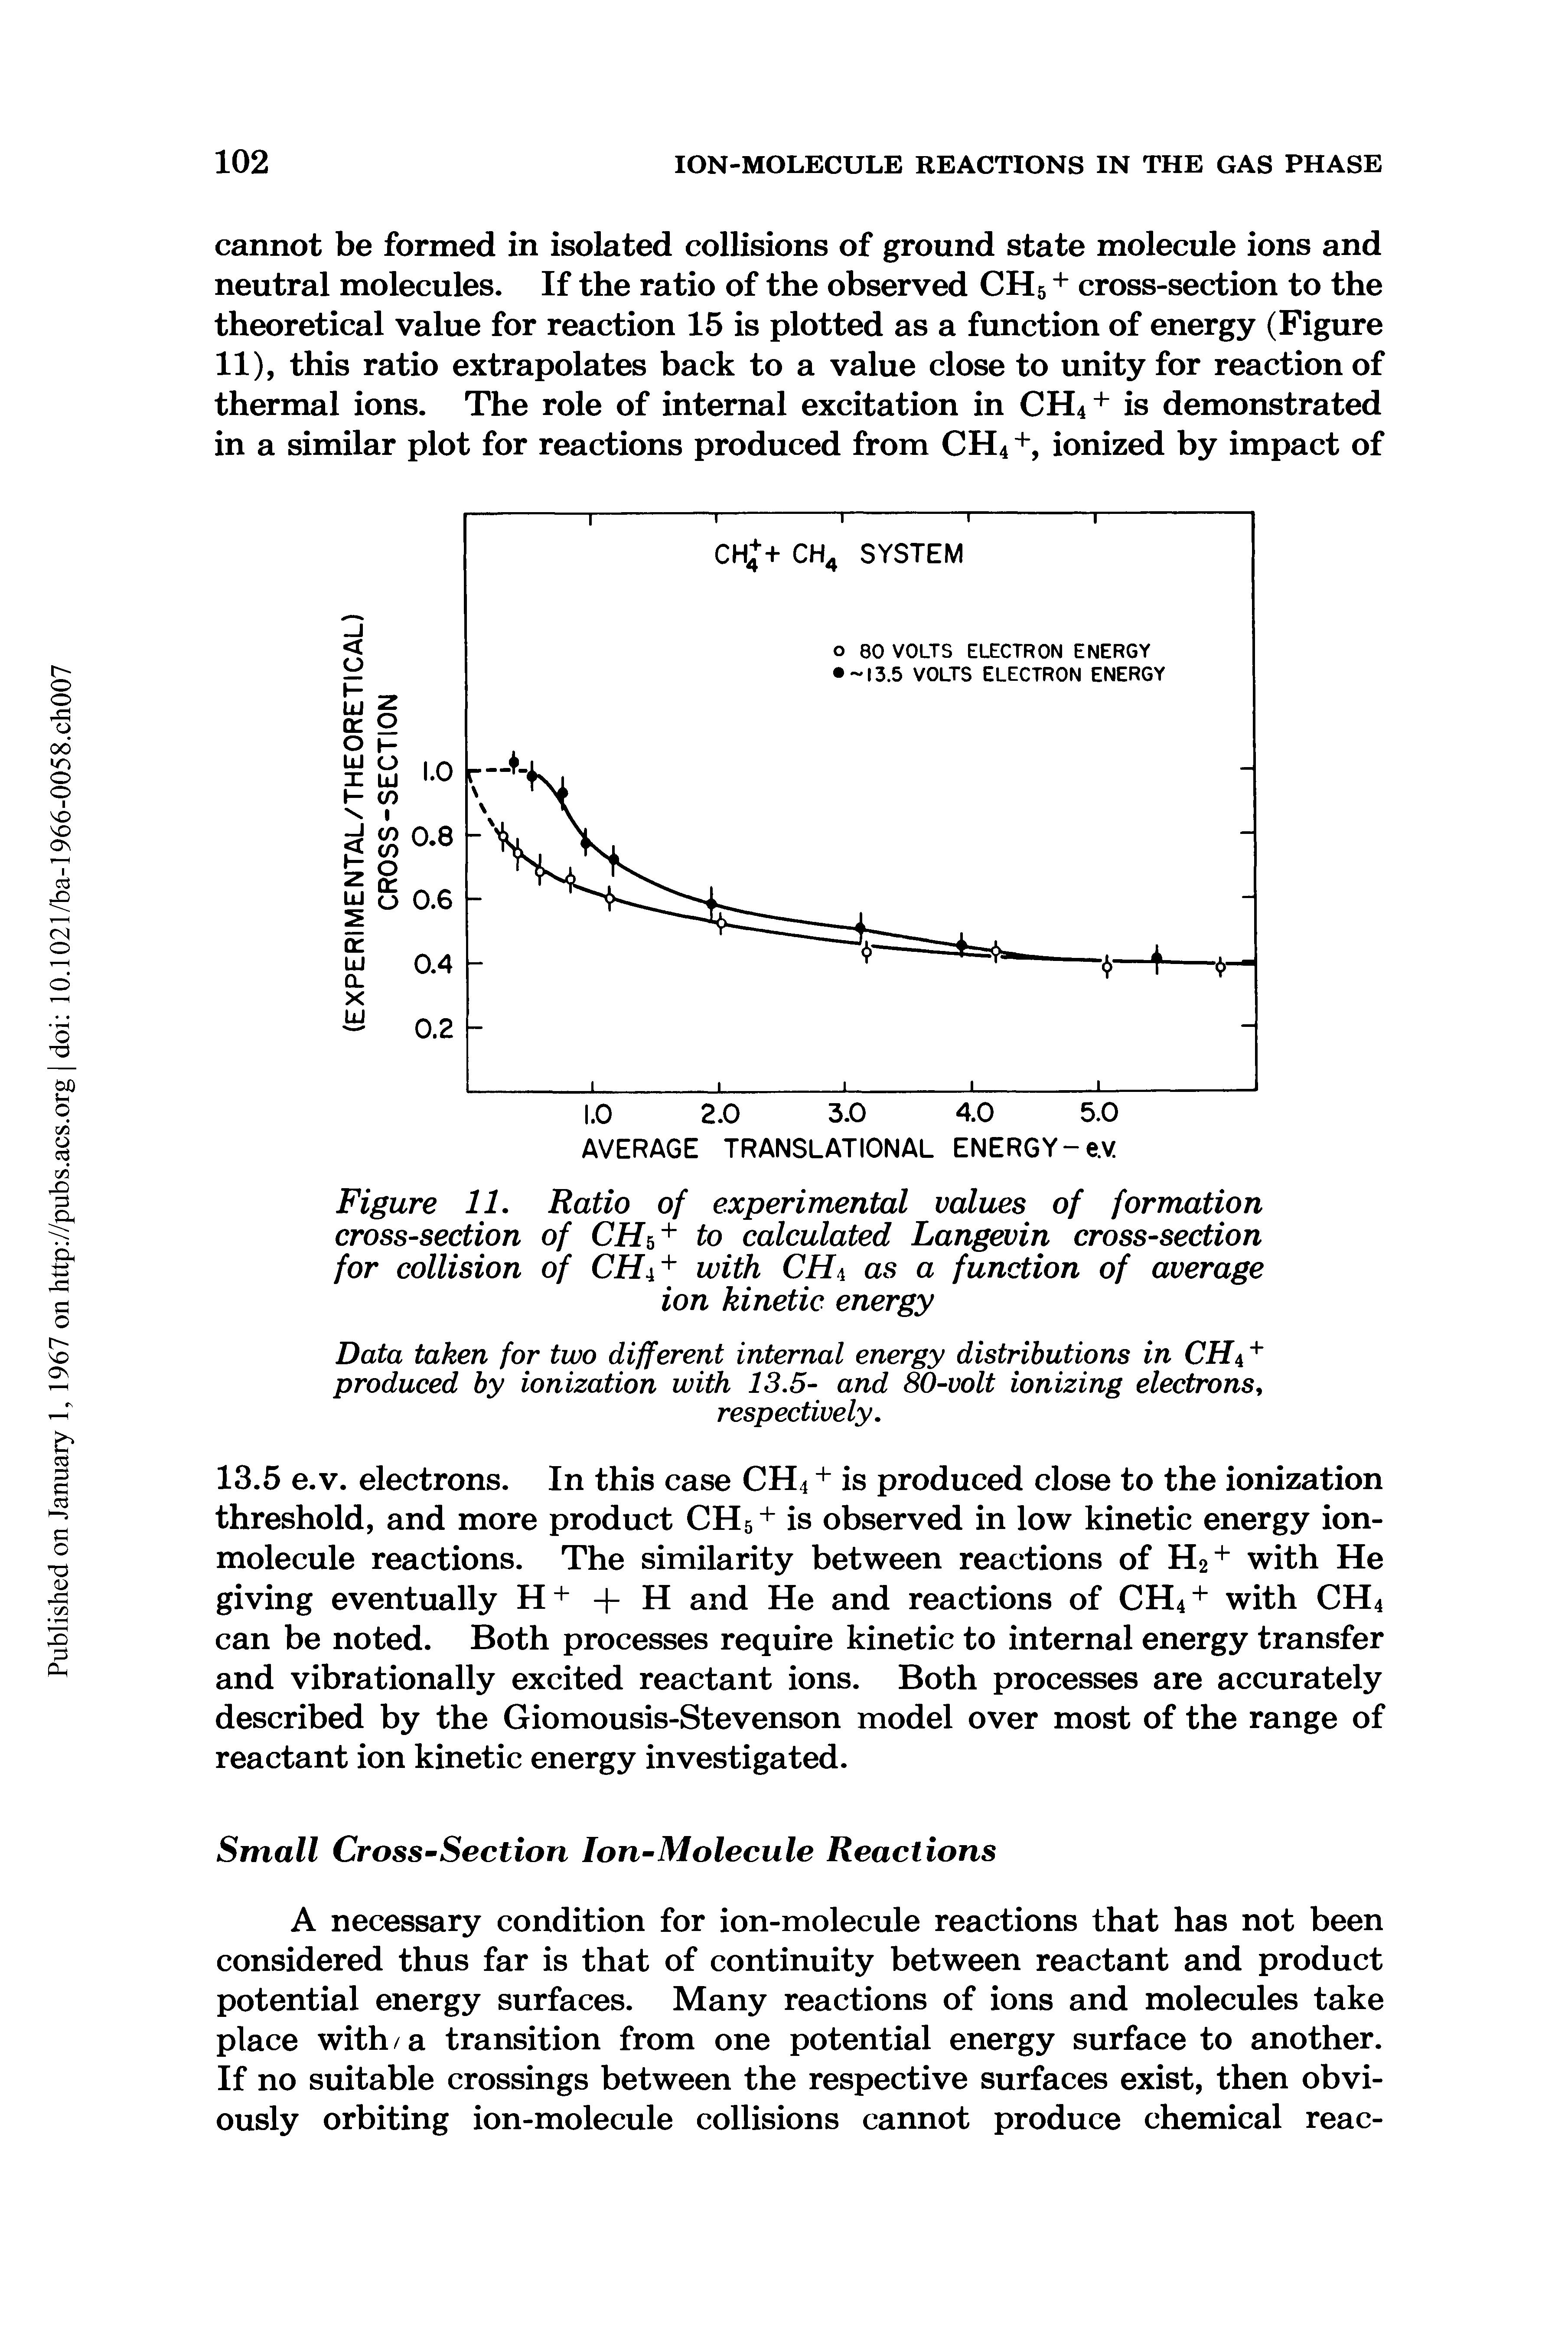 Figure 11. Ratio of experimental values of formation cross-section of CH0 + to calculated Langevin cross-section for collision of CH + with CH as a function of average ion kinetic energy...